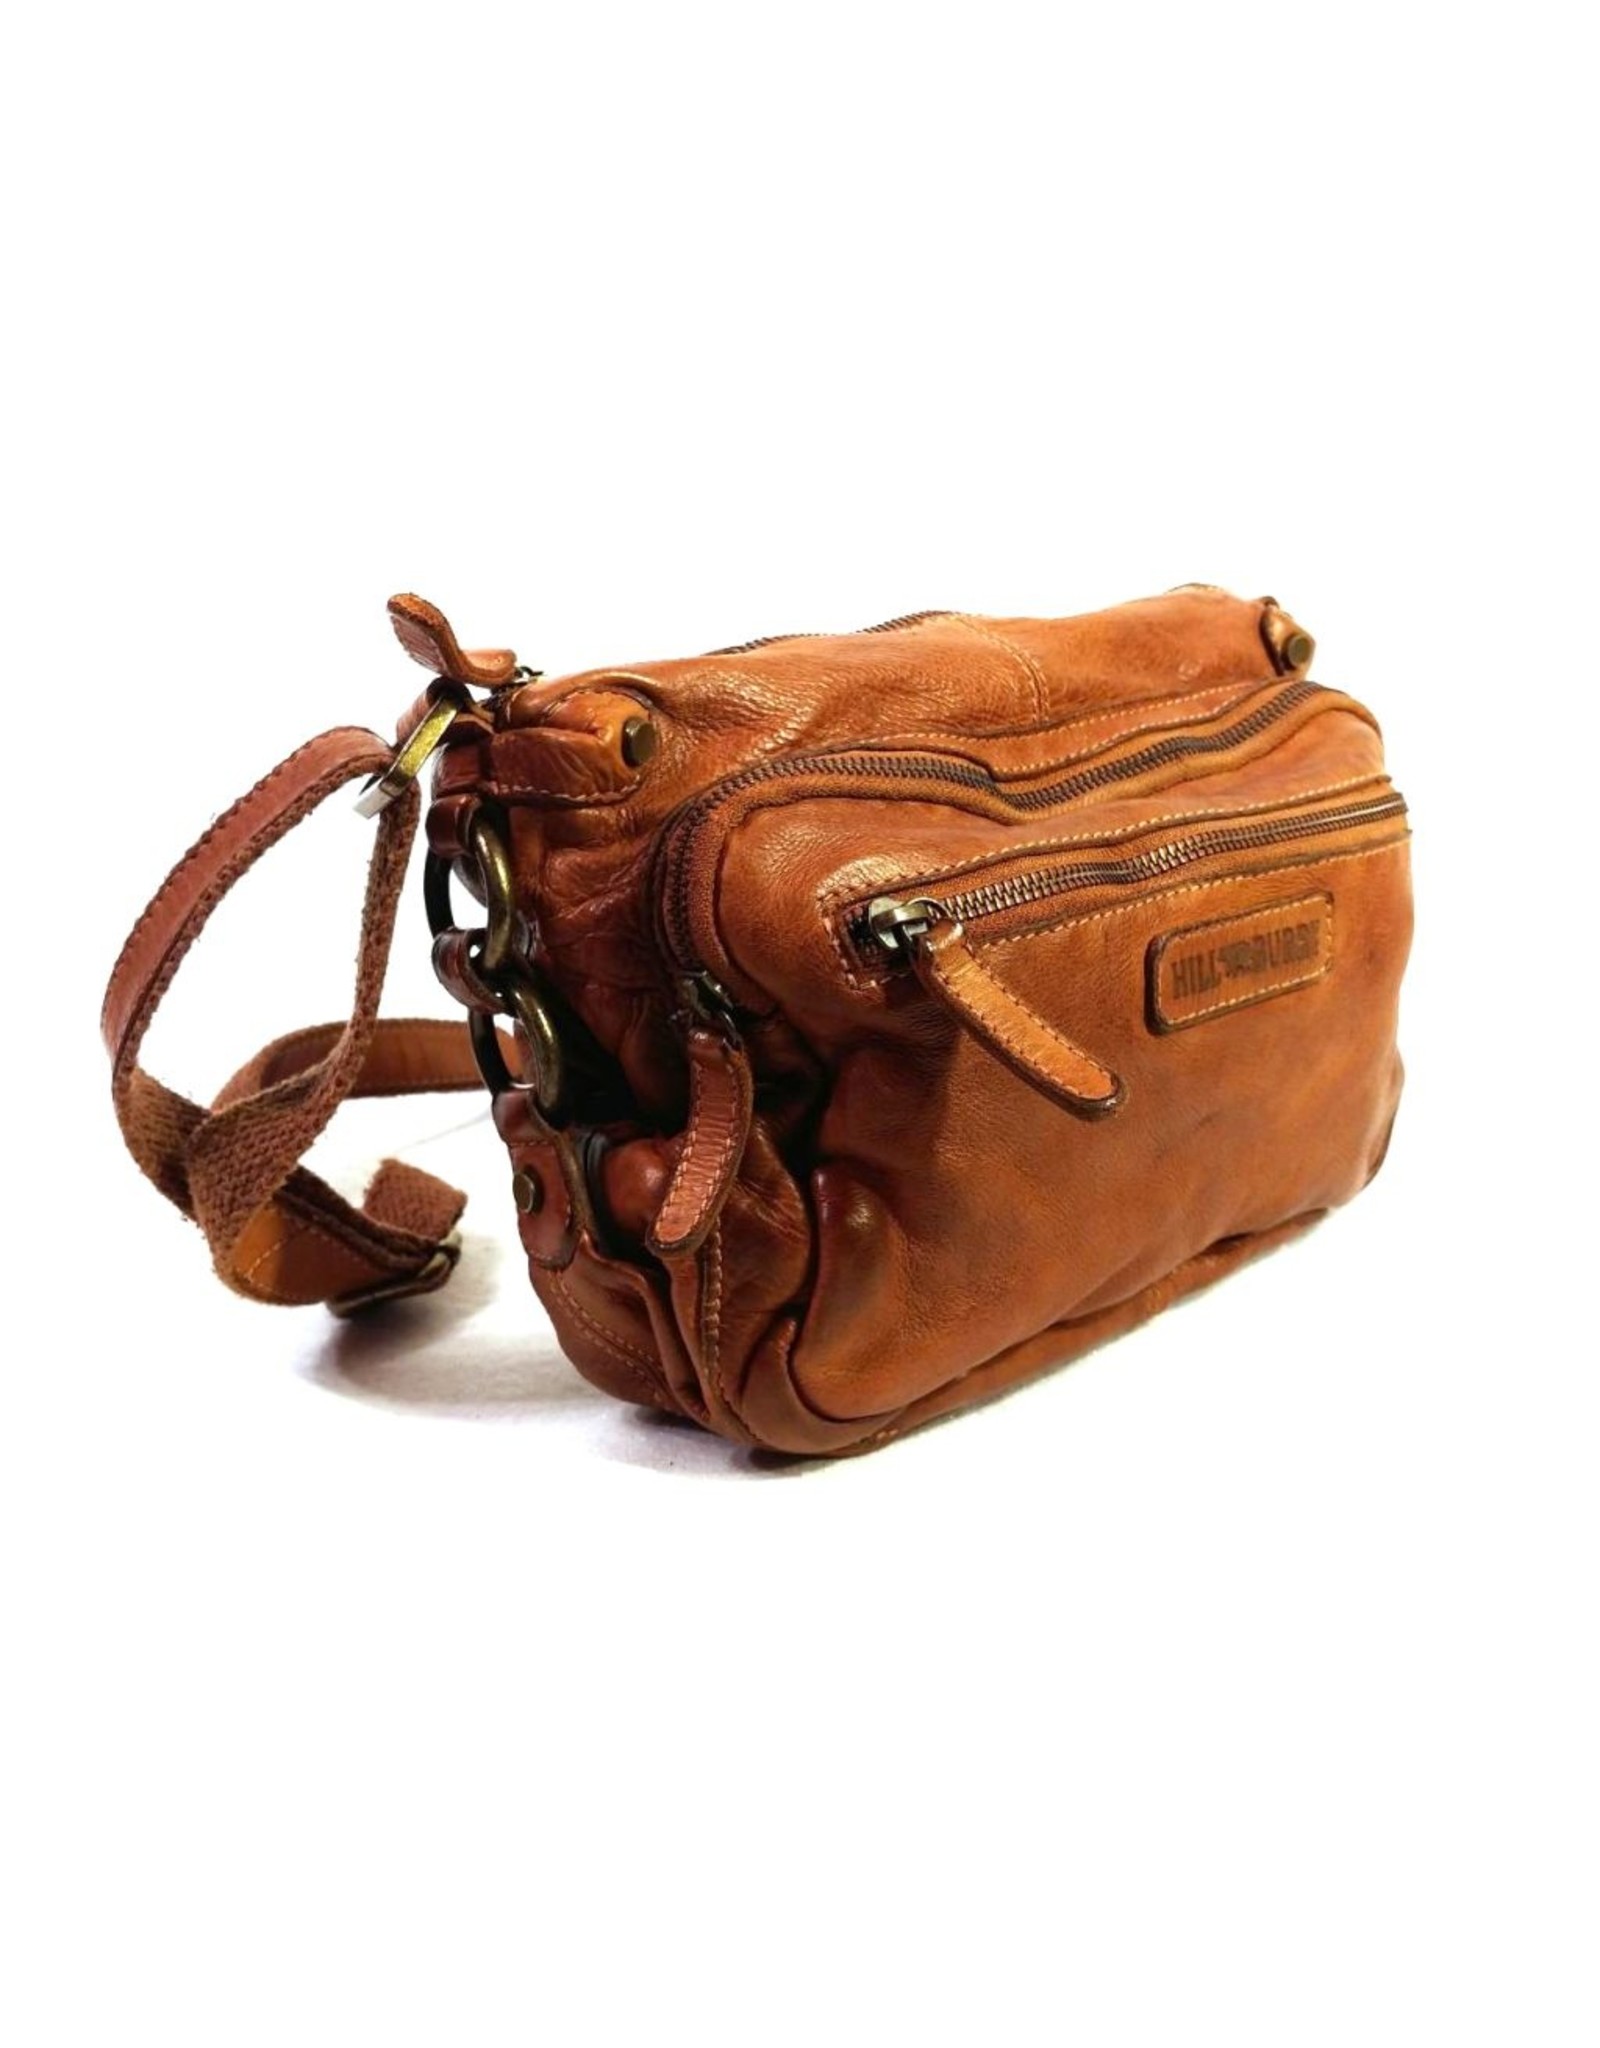 HillBurry Leather bags - HillBurry Leather Shoulder bag of Washed Leather tan